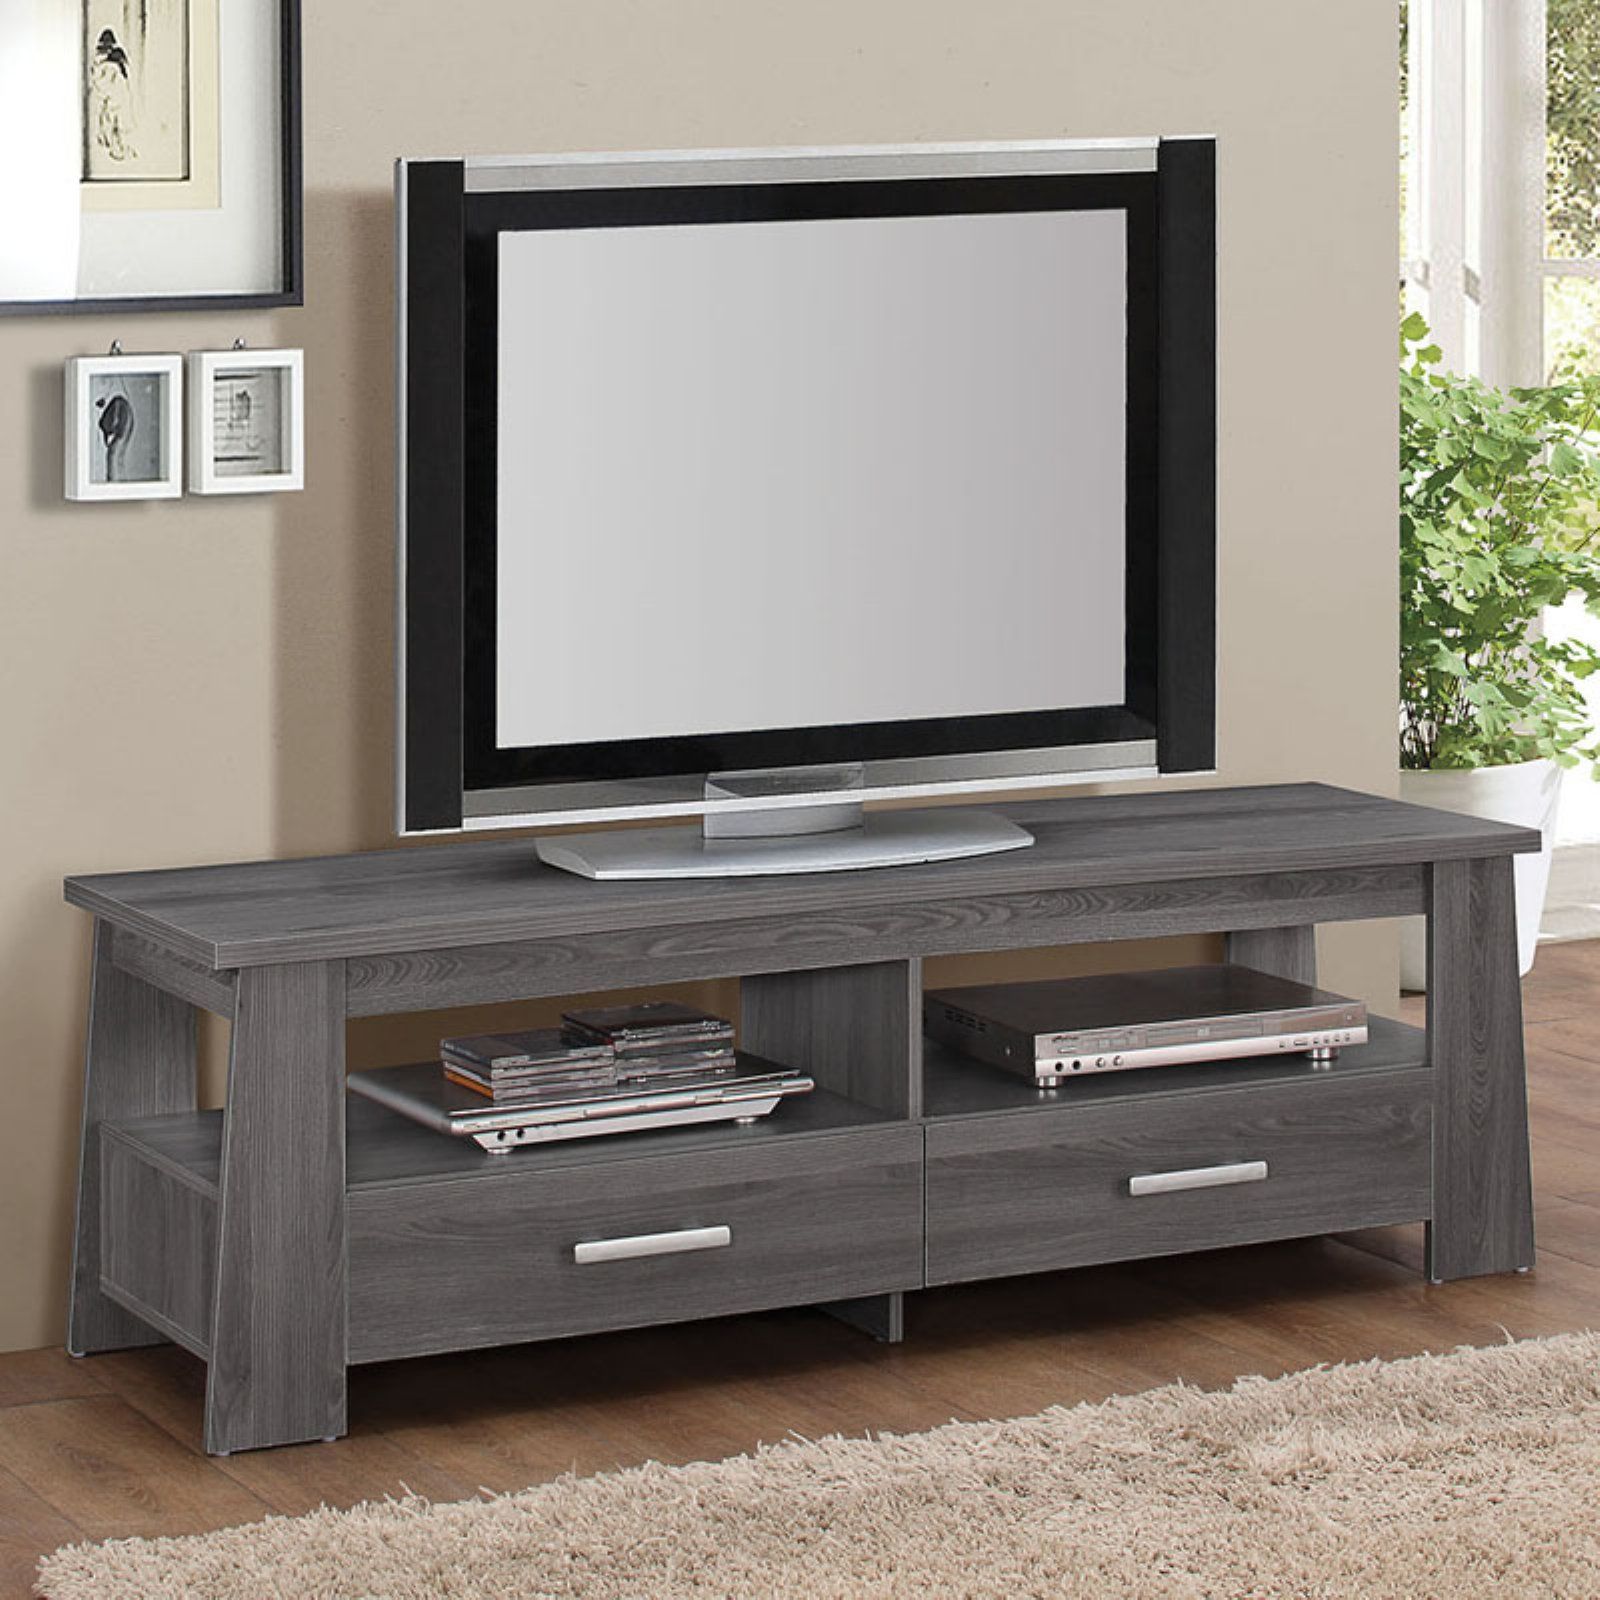 Acme Falan Dark Gray Oak Tv Stand For Flat Screen Tvs Up For Oak Tv Cabinets For Flat Screens (Photo 3 of 12)